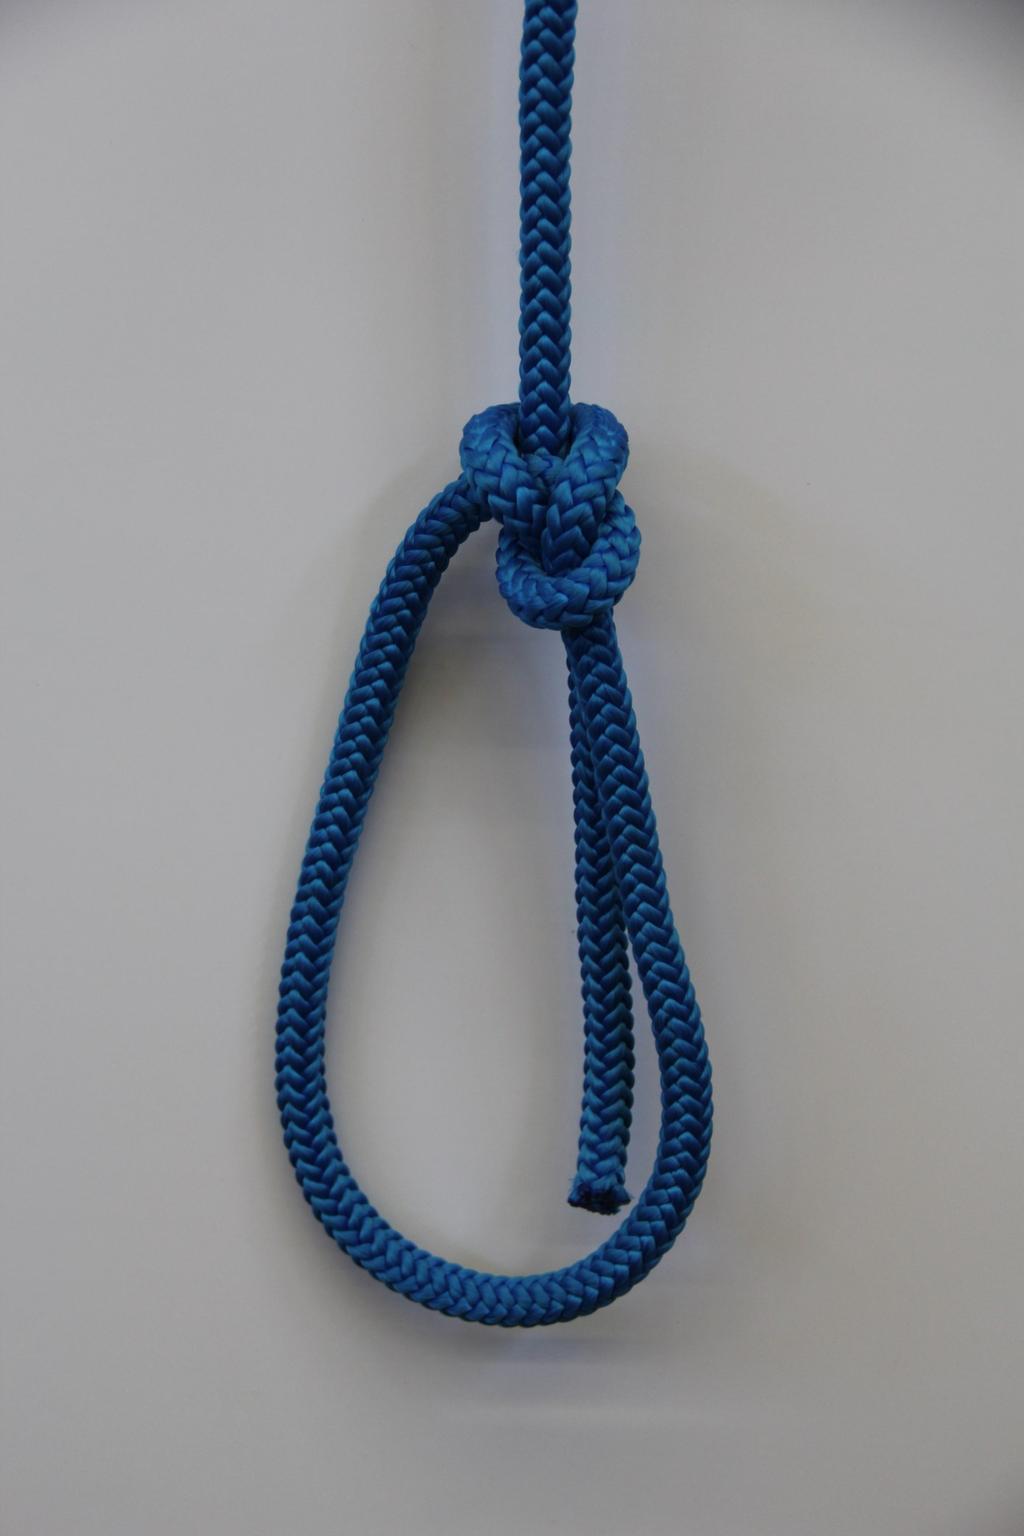 Bowline: useful knot for forming a loop. Easy to untie, even after loading.